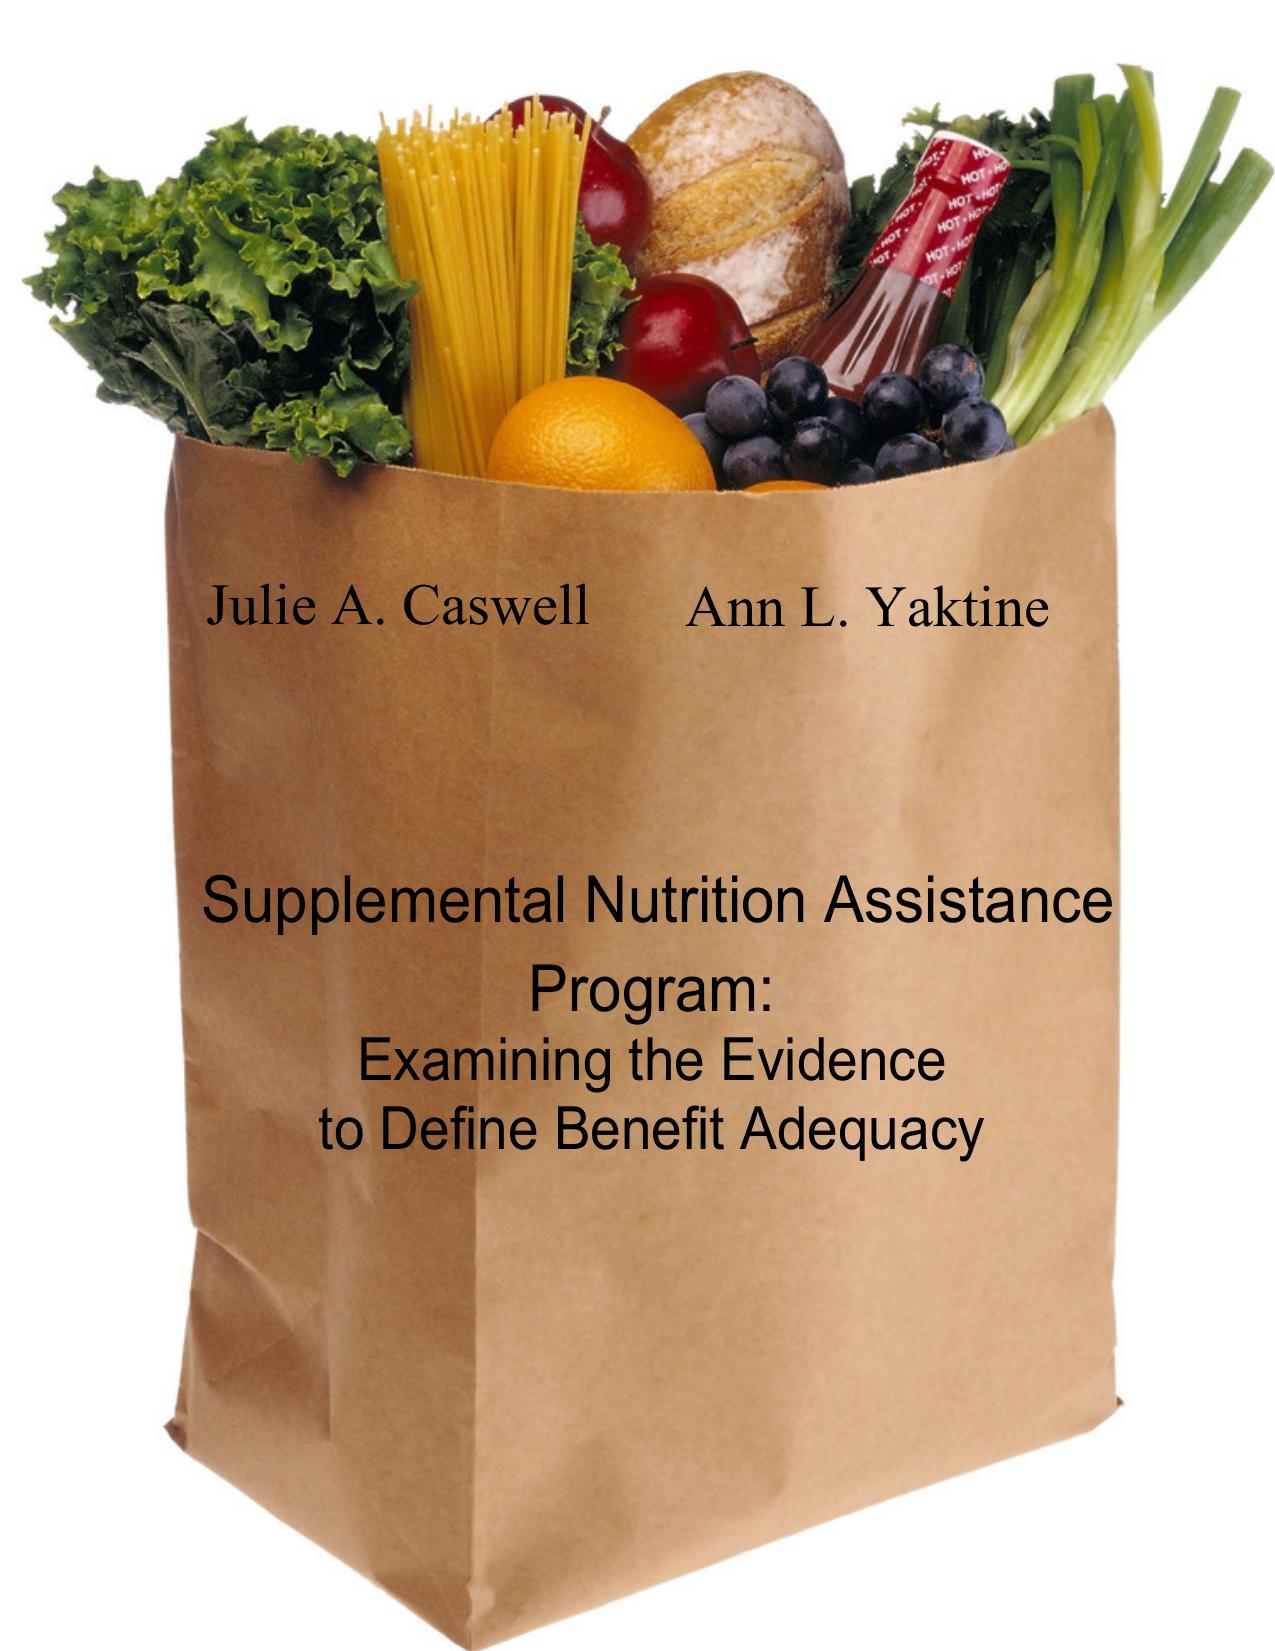 Supplemental Nutrition Assistance Program Examining the Evidence to Define Benefit Adequacy 2013